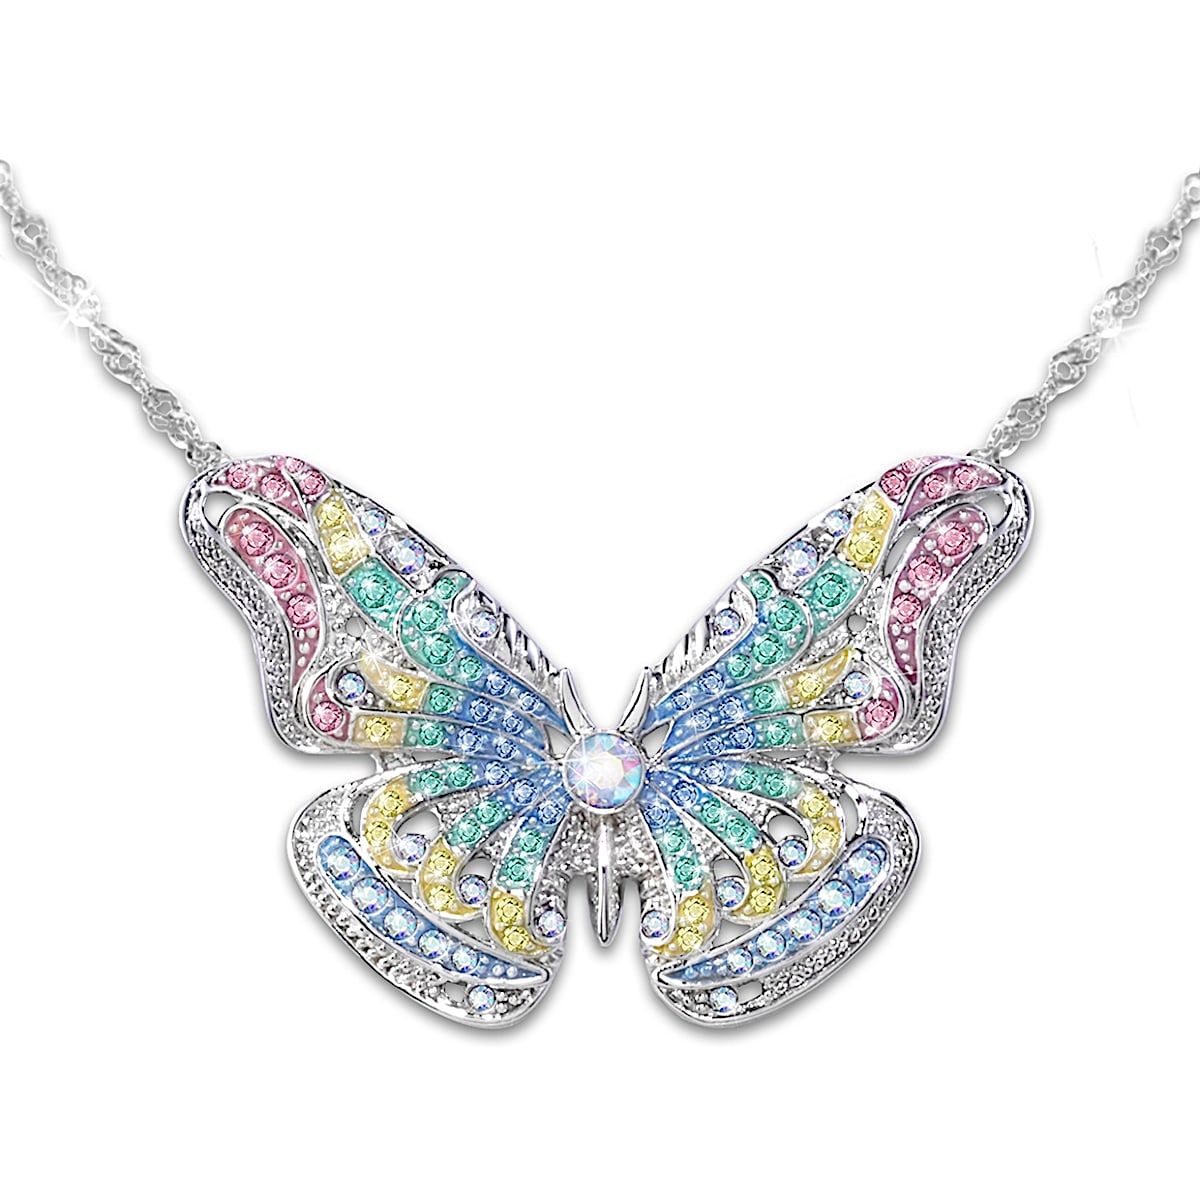 Stylish Korean Butterfly Butterfly Pendant Necklace With Glass Crystal  Pendant For Women Perfect Clavicle Chain Jewelry From Tjewelry, $0.91 |  DHgate.Com